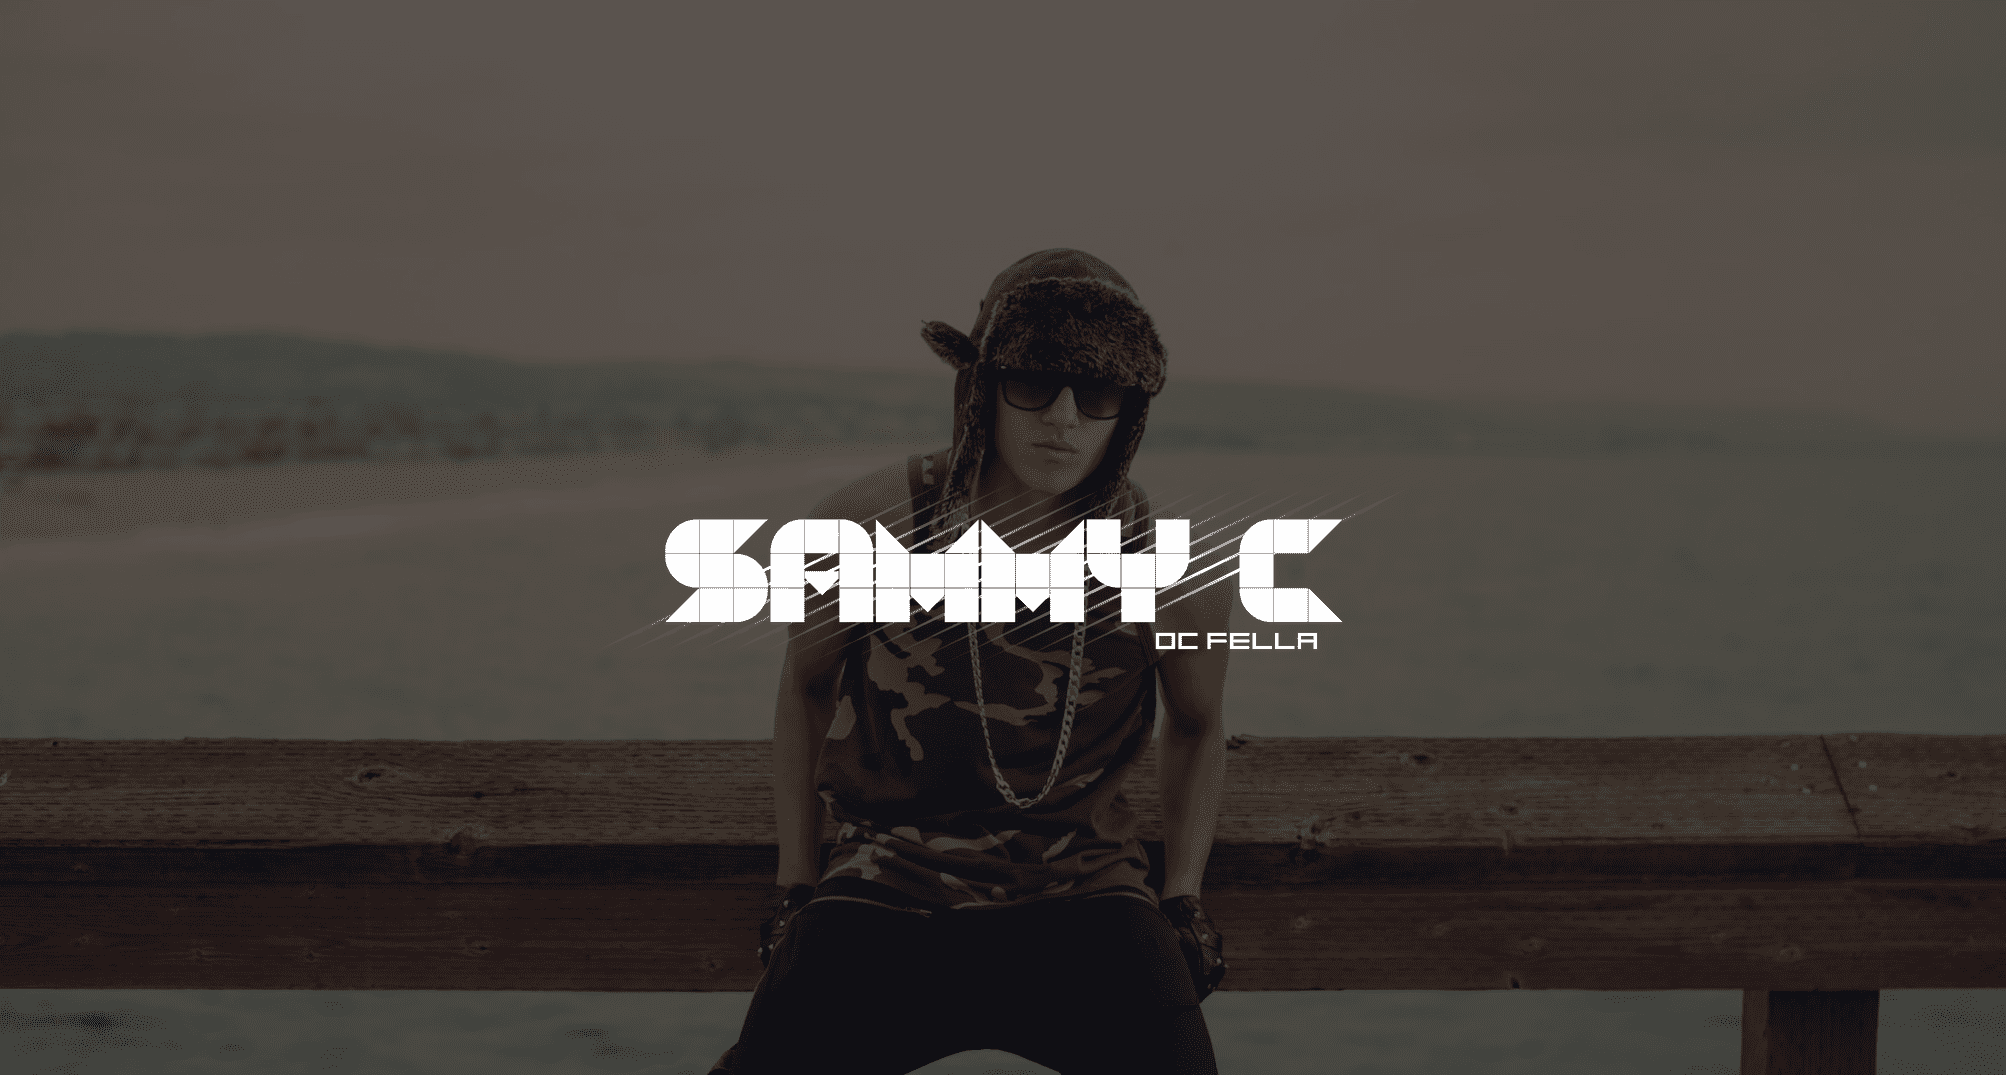 White Sammy C DC Fella logo with background of young man wearing black pants and camouflage tank top with black shoes and shades posing for camera with black leather gloved hands at his sides. He is sitting on a wooden railing by the ocean.